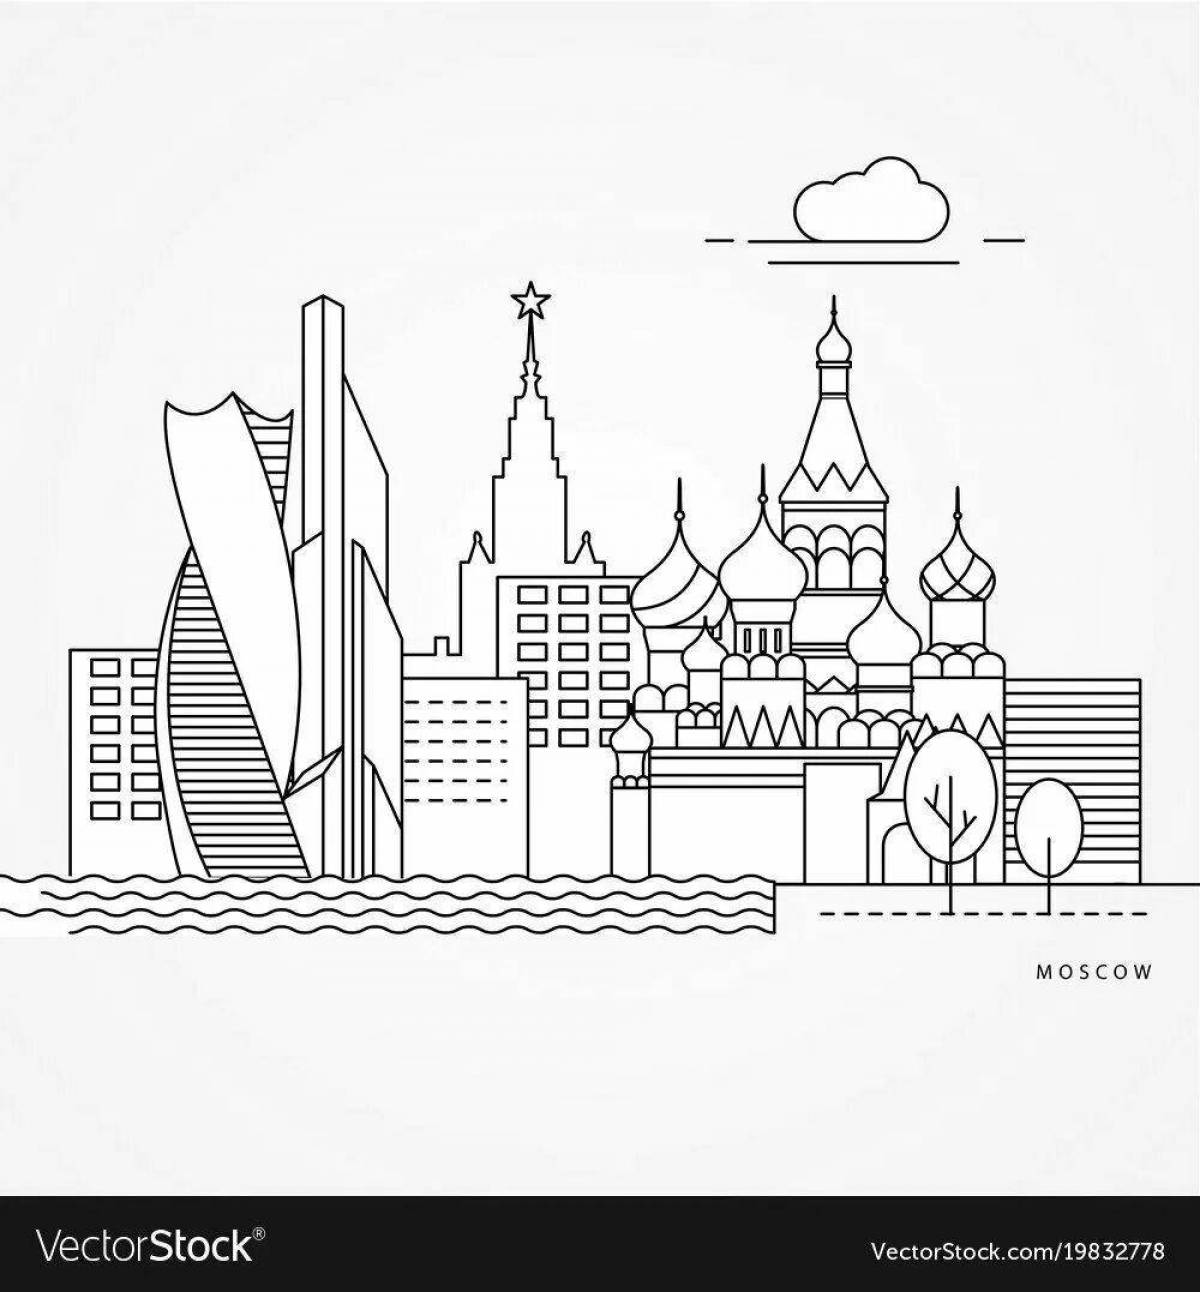 Charming moscow city coloring book